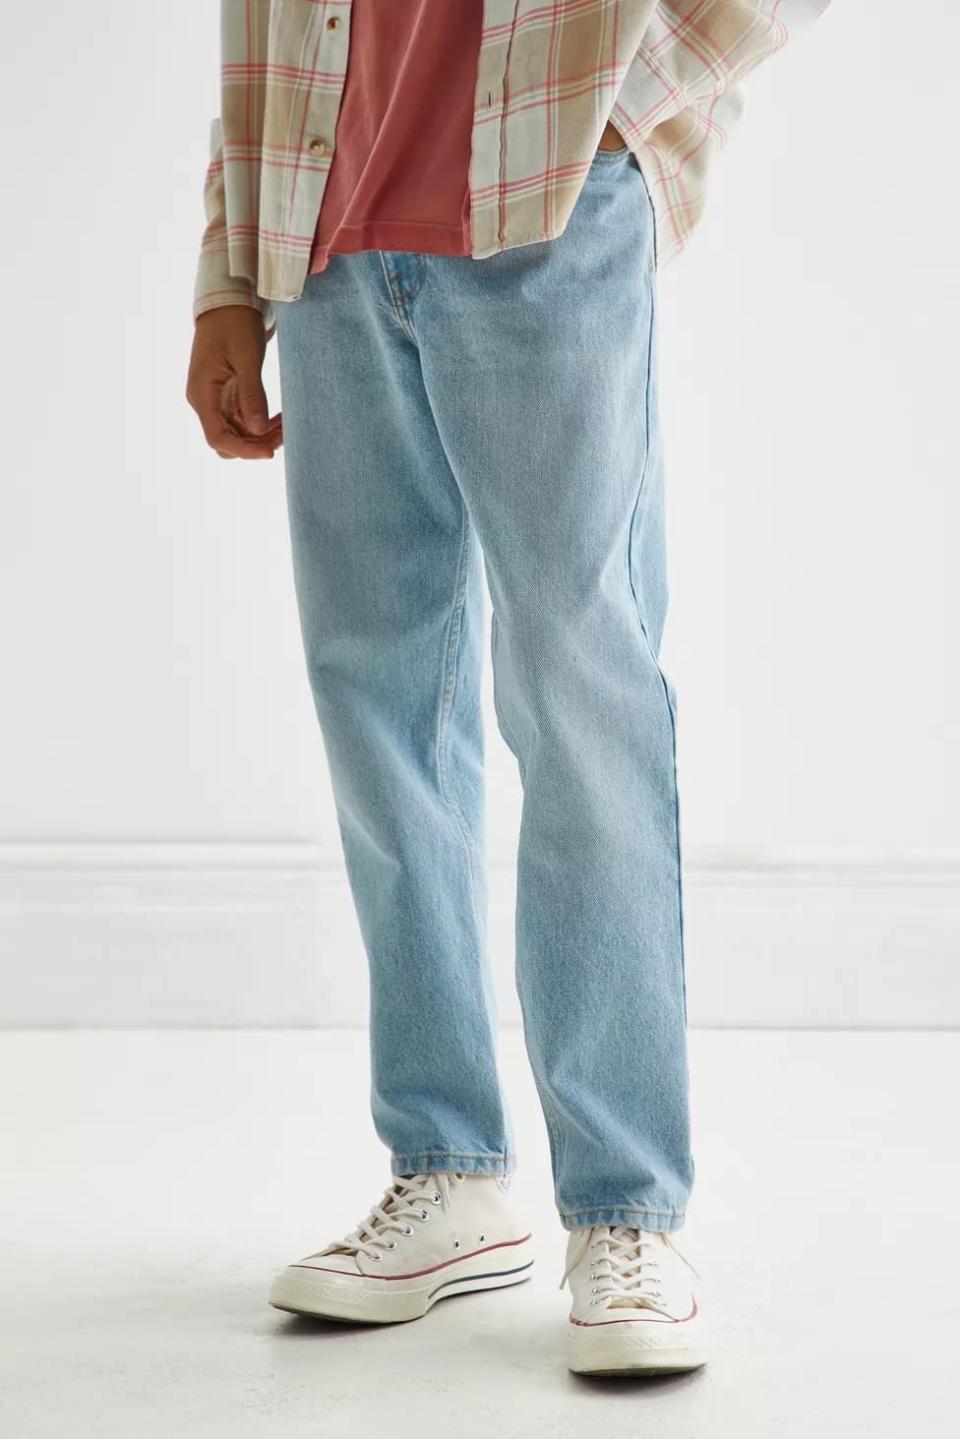 mens light wash jeans, Urban Outfitters BDG Dad Fit Jean 